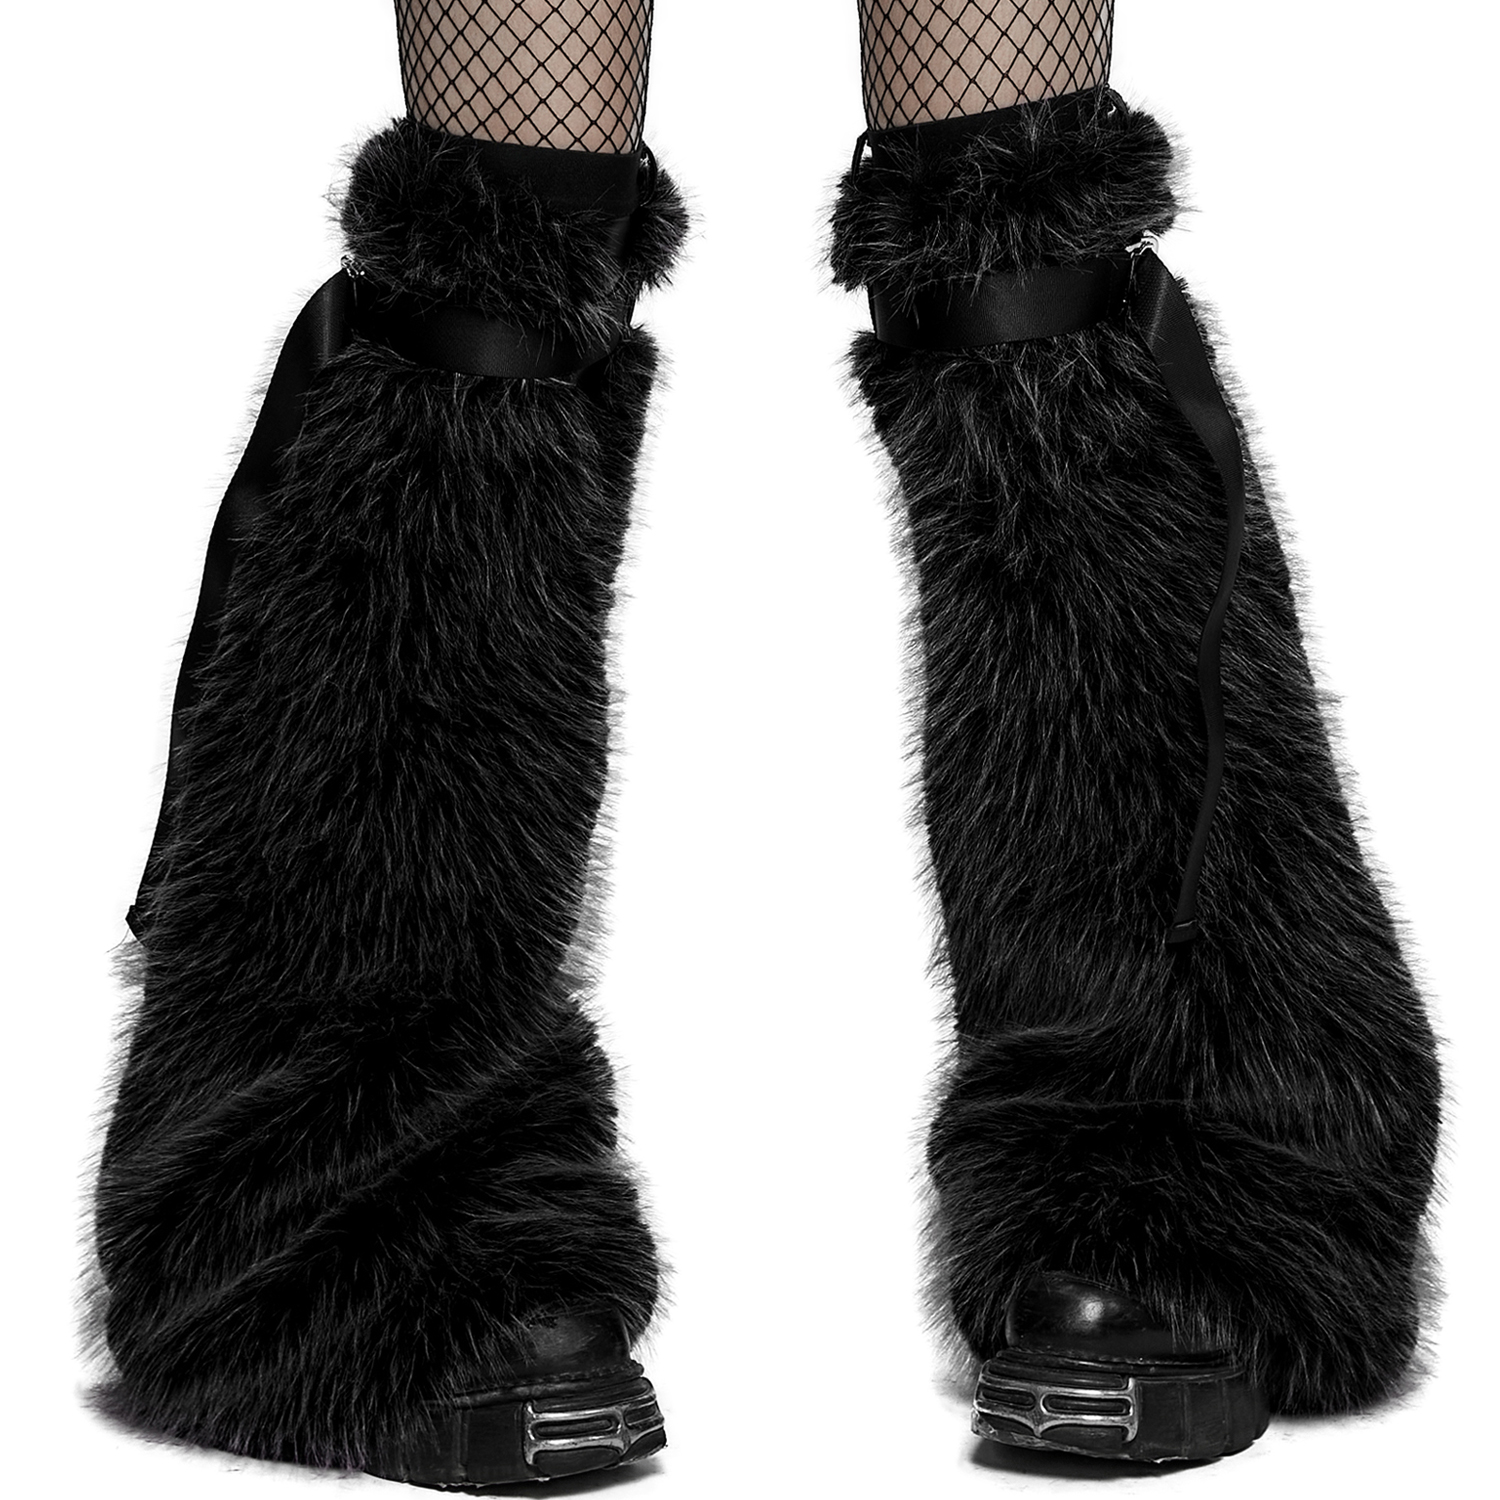 The Costume Center Black and White Fuzzy Leg Warmers Women Adult